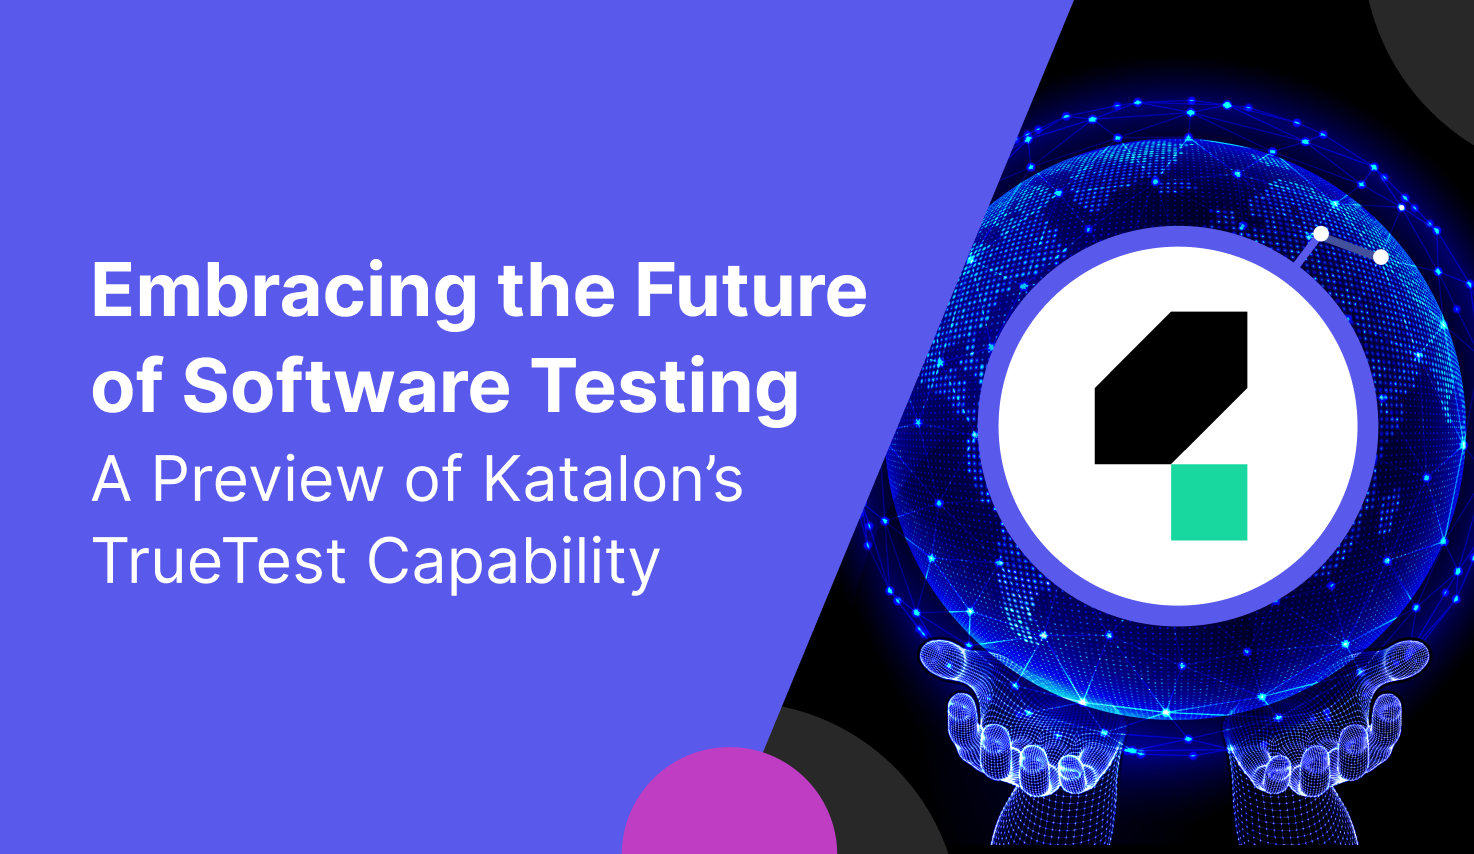 Embracing the Future of Software Testing: A Preview of Katalon's TrueTest™